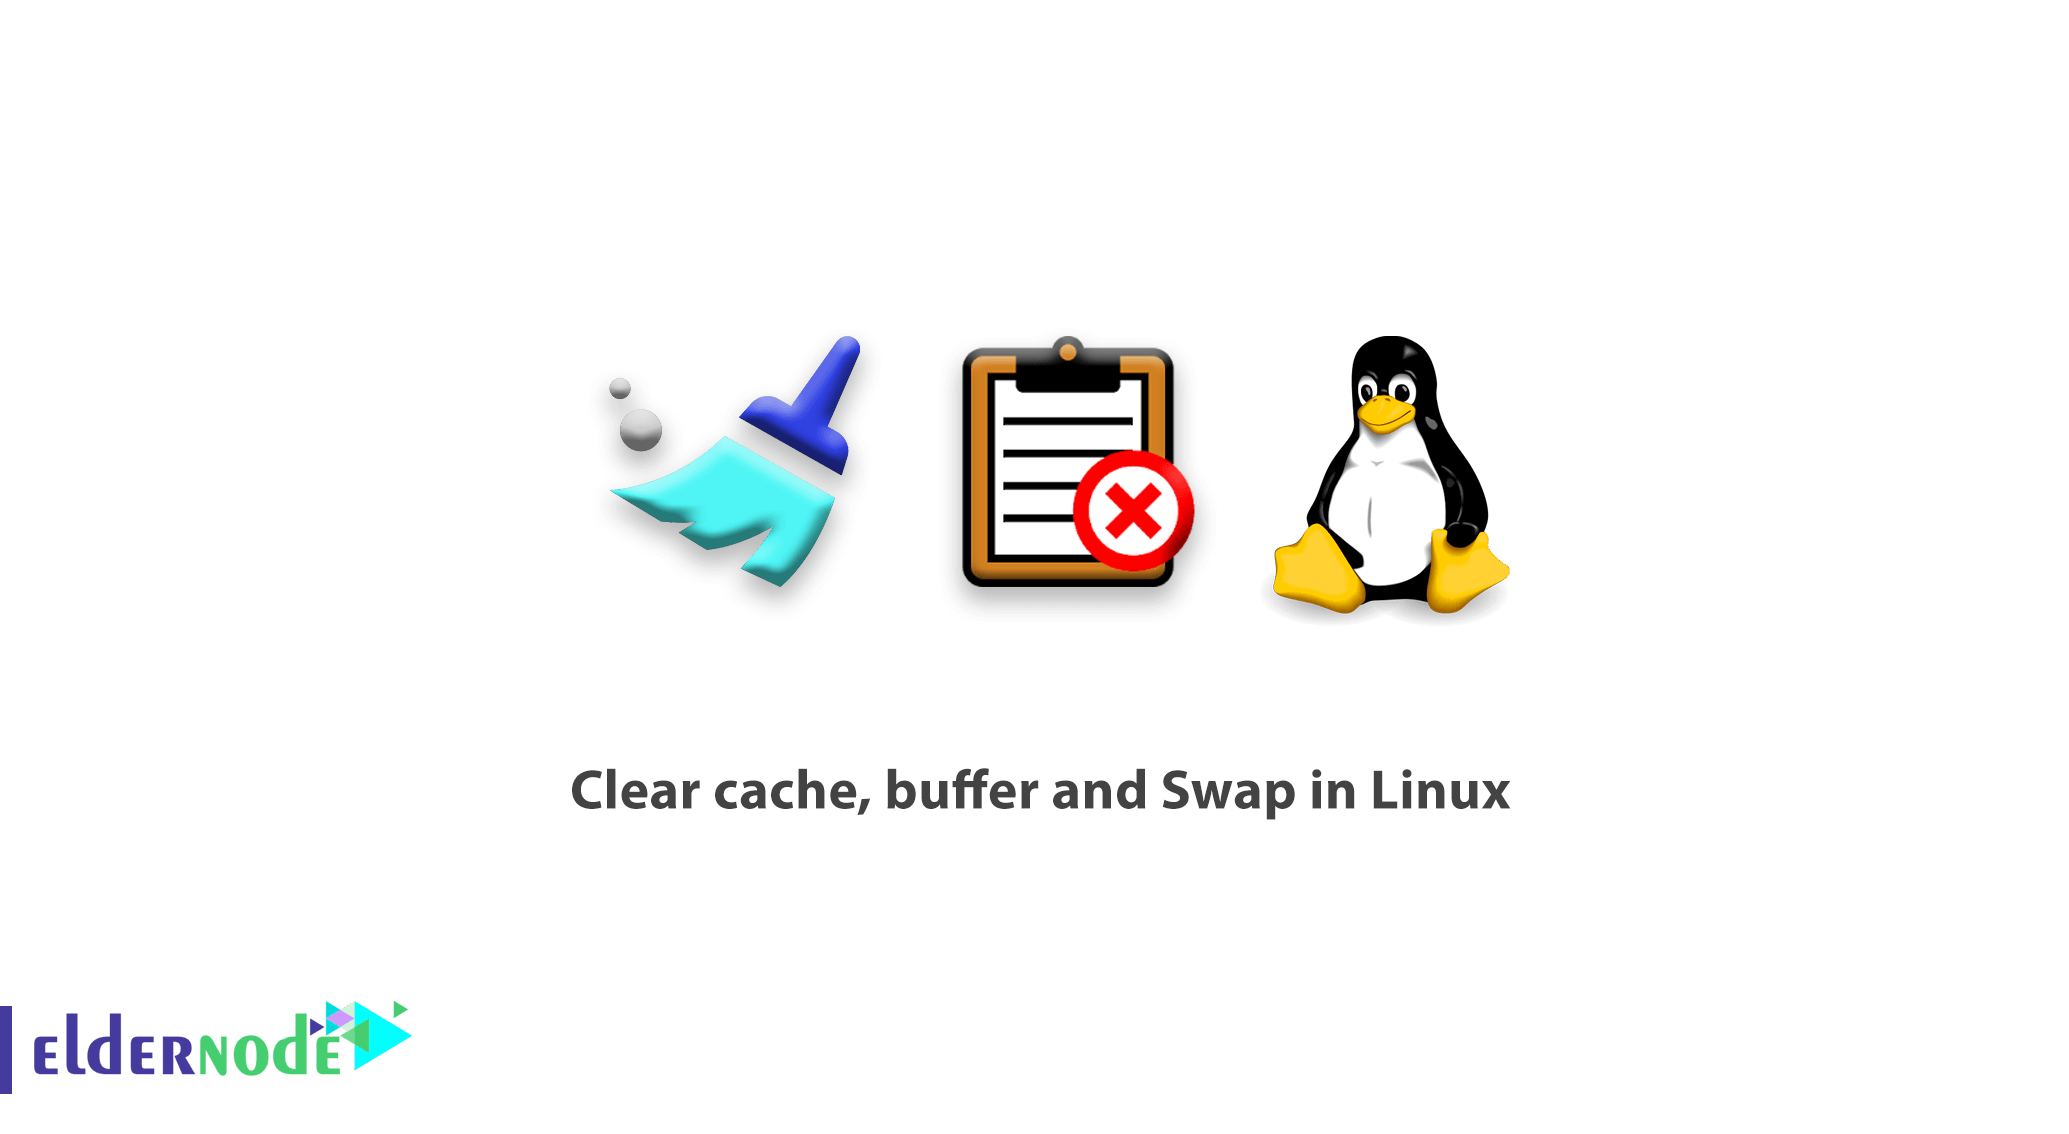 Clear cache, buffer and Swap in Linux